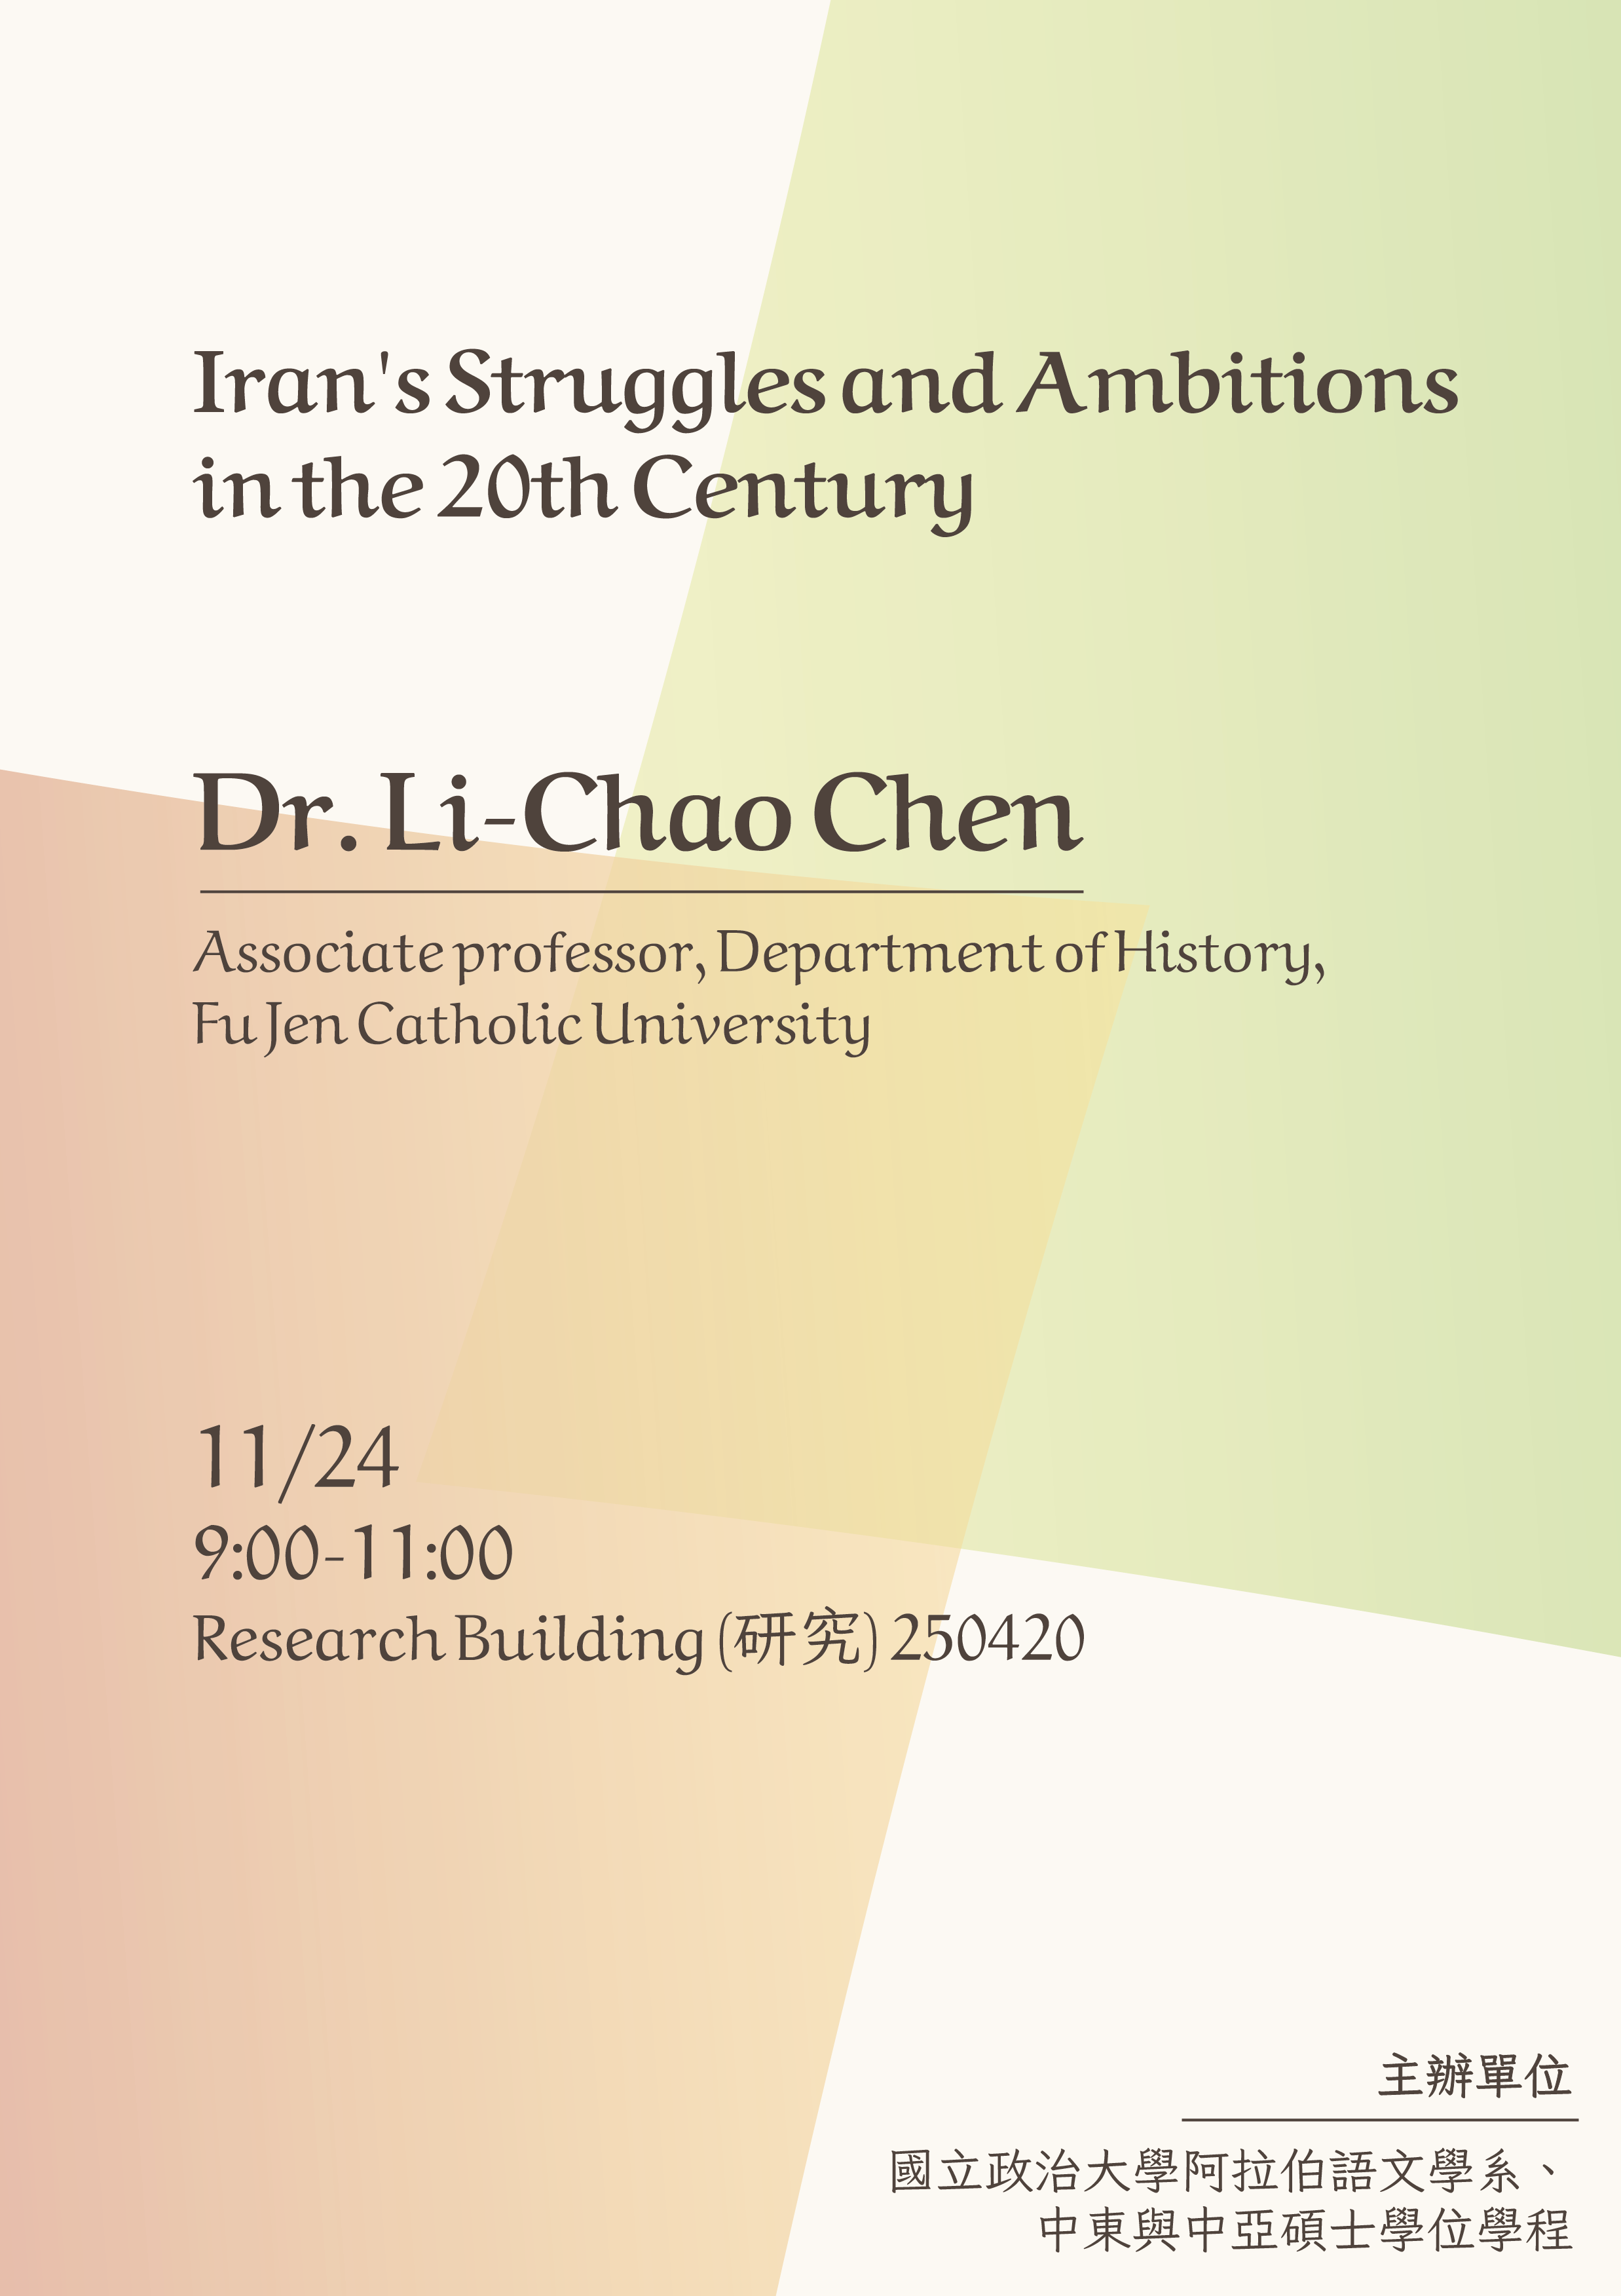 Lecture-11/24/9:00a.m. Research Building250420